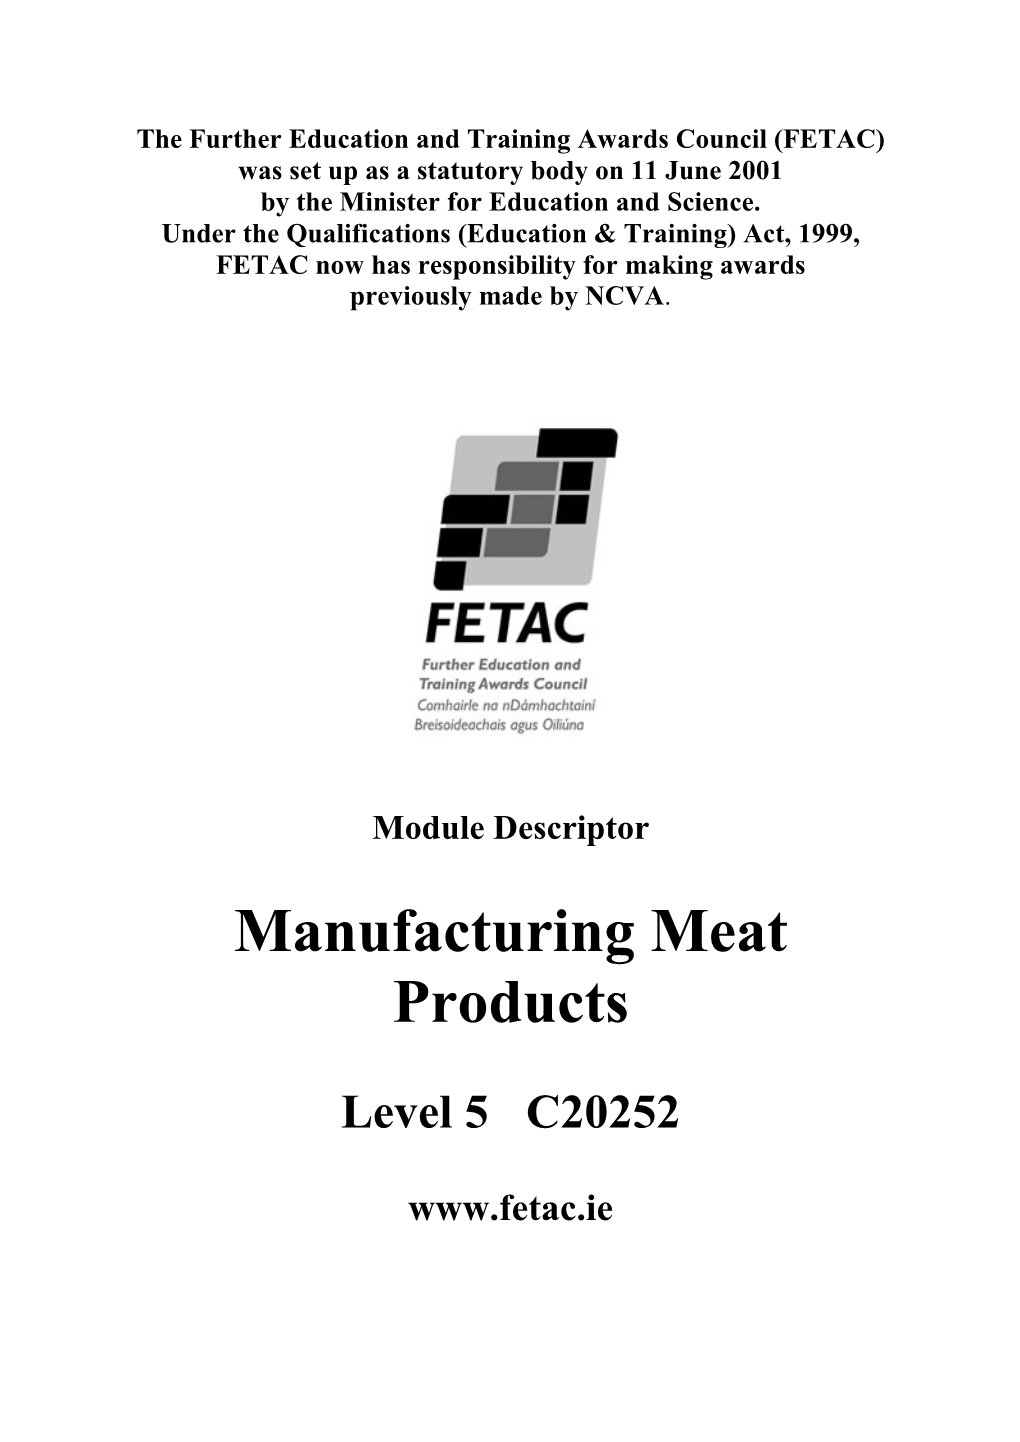 Manufacturing Meat Products